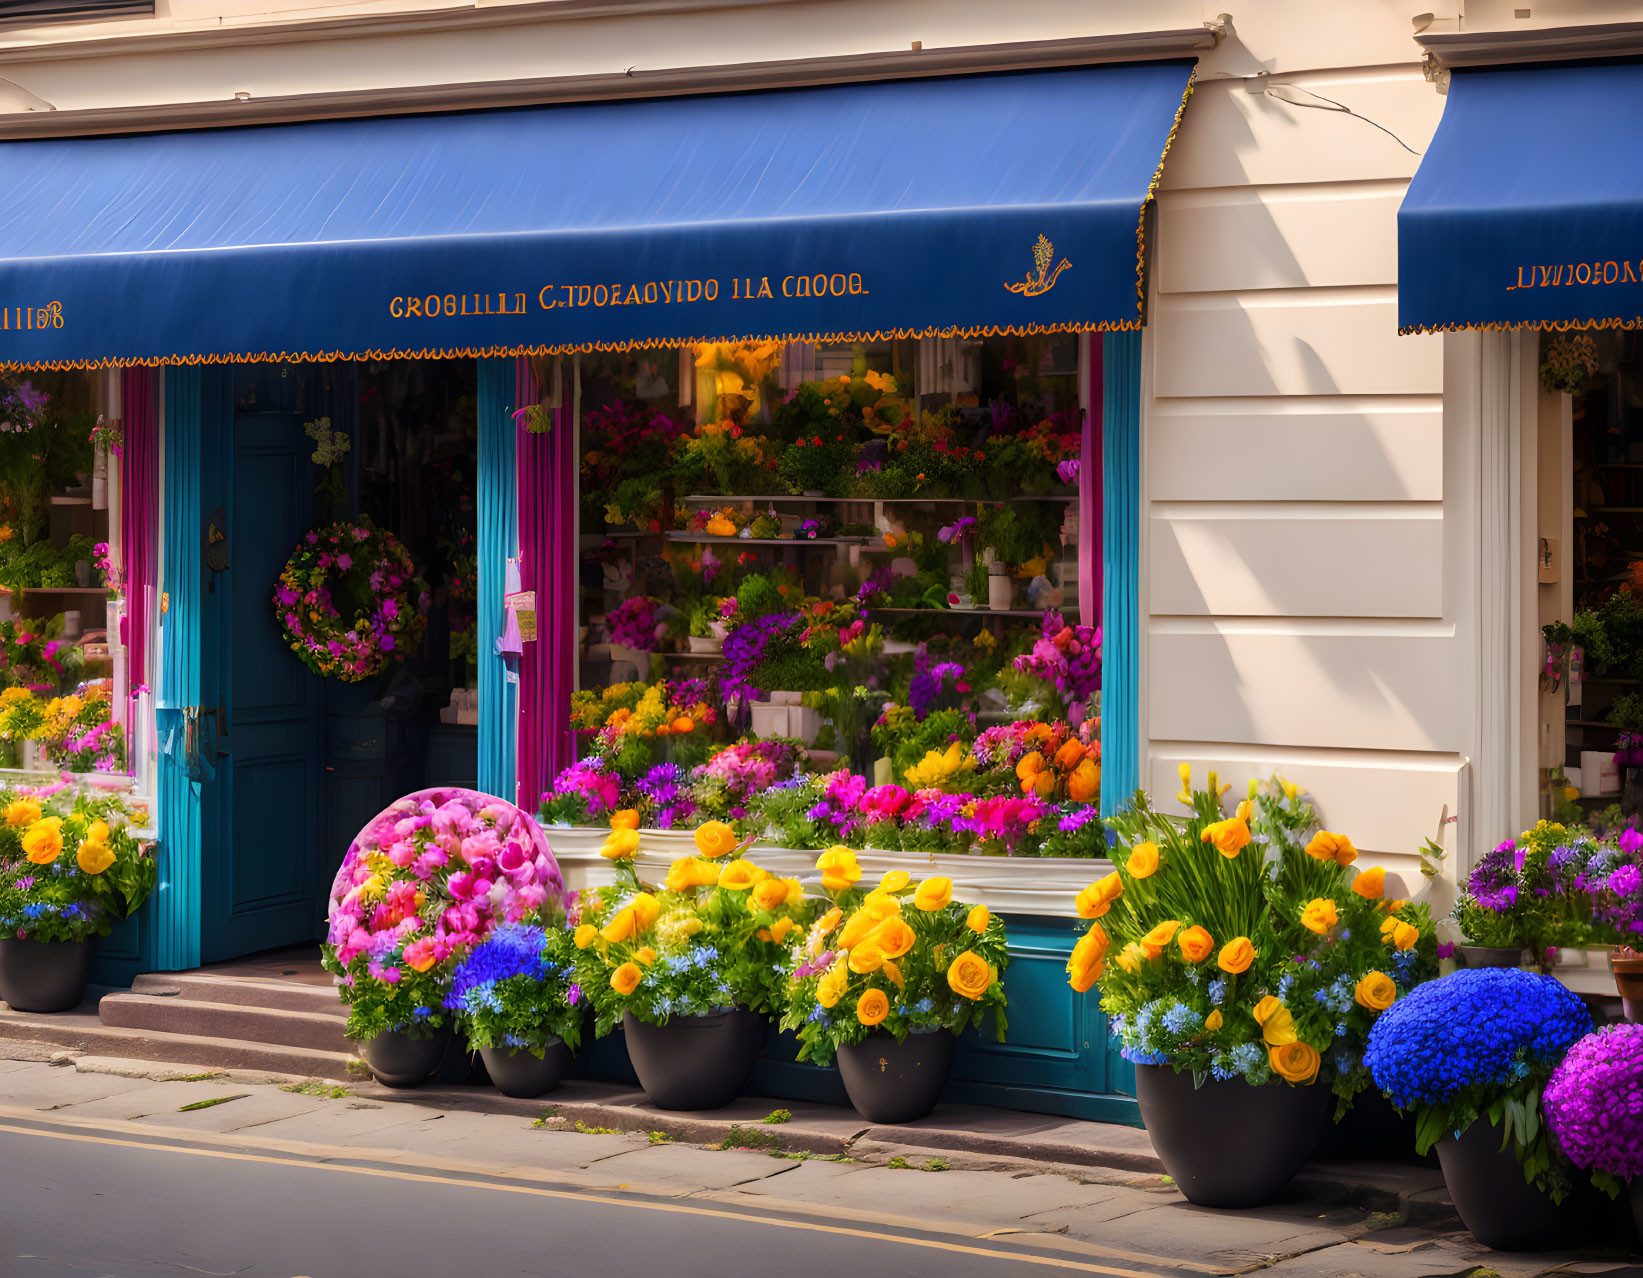 Bright blue awnings and vibrant flowers on charming flower shop facade